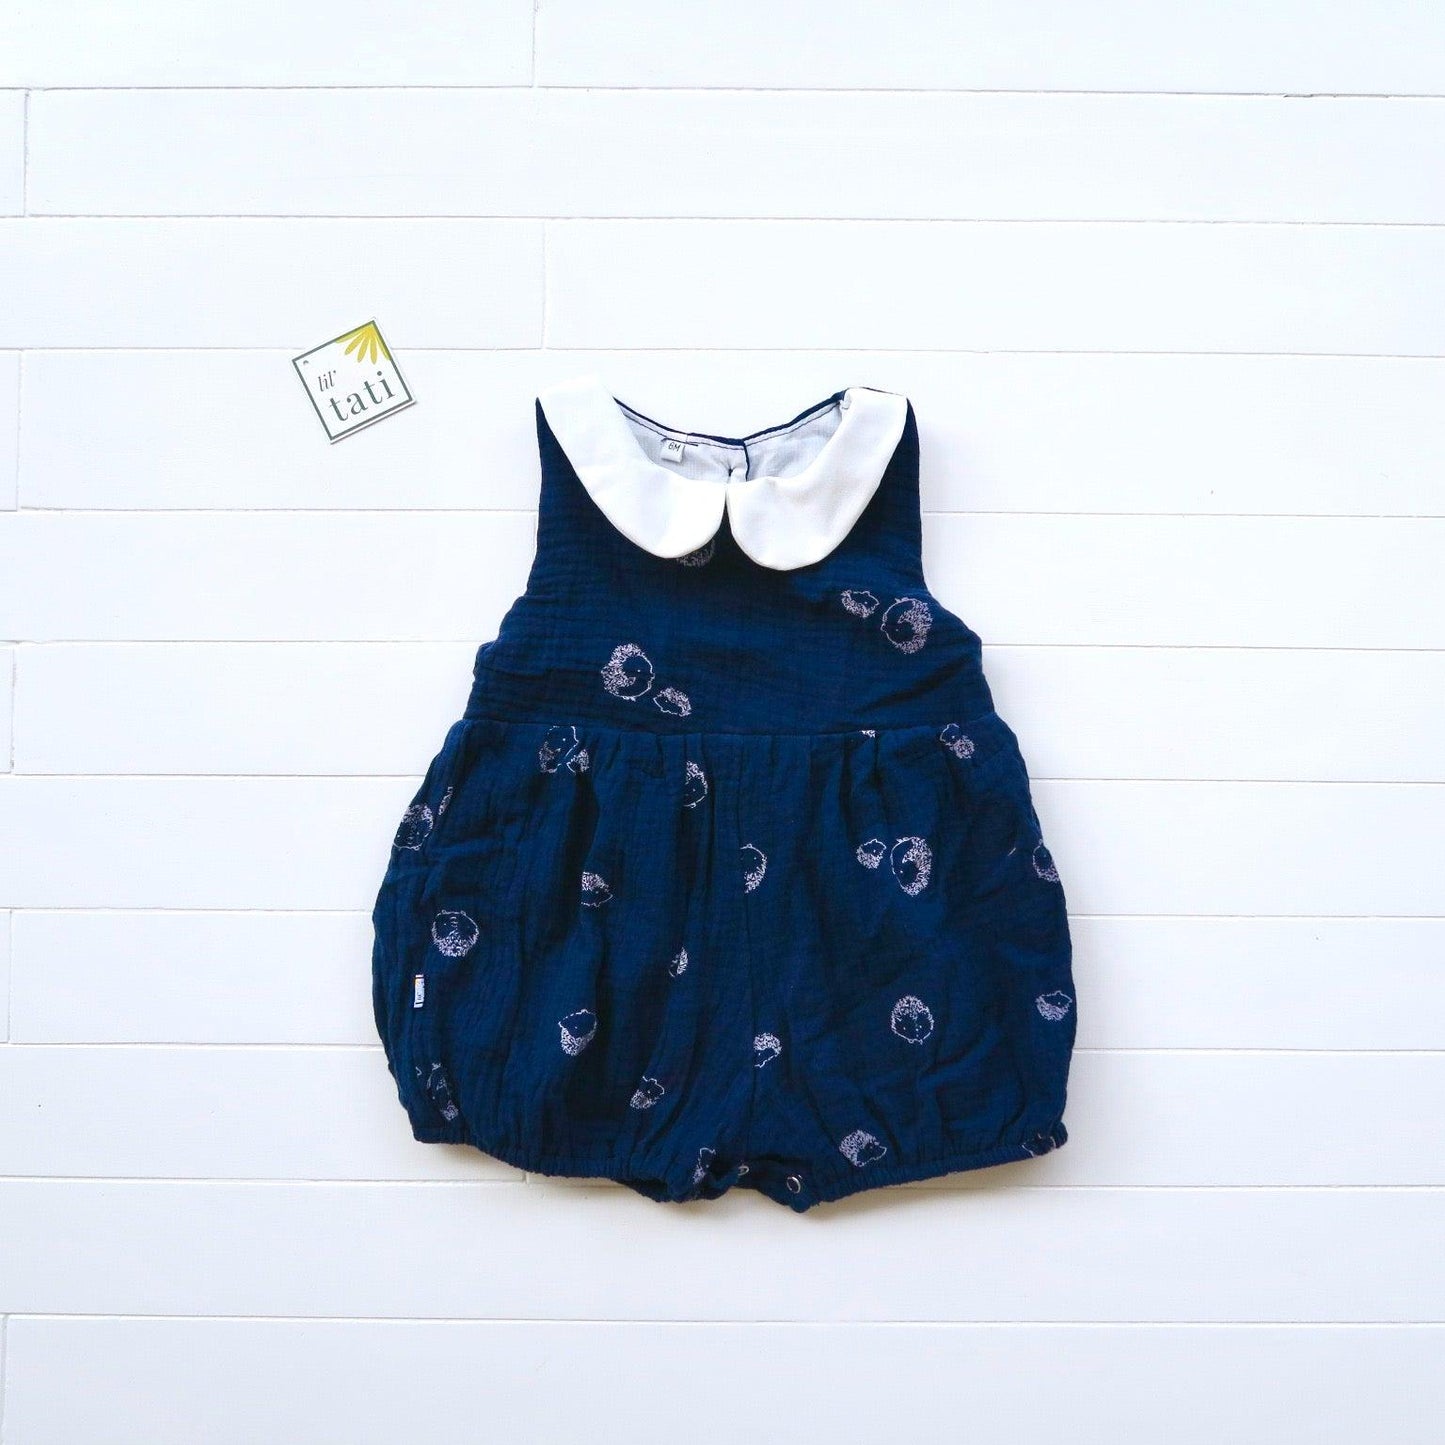 Orchid Playsuit - Collar in Navy Hedgehog Crepe - Lil' Tati